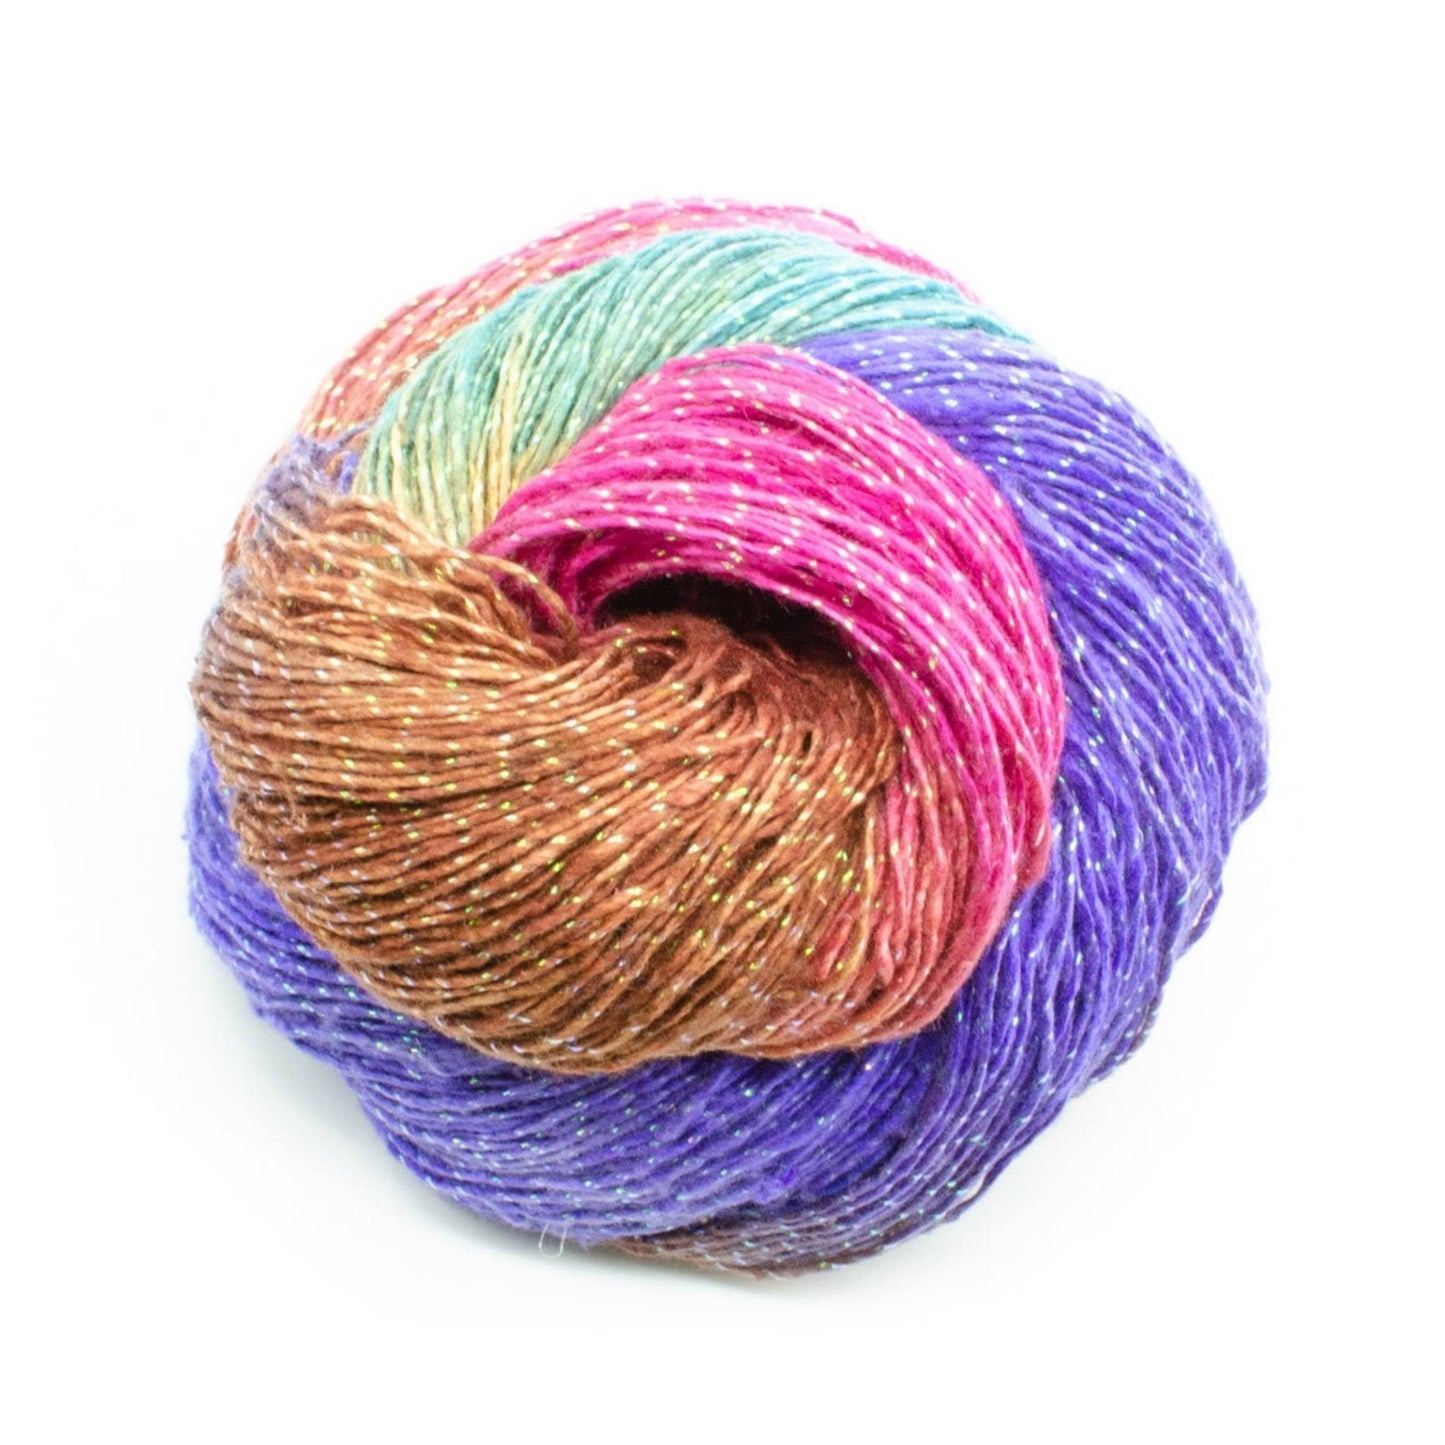 a skein of recycled silk sparkle yarn in the color brown, pink, purple, and light blue on a white background